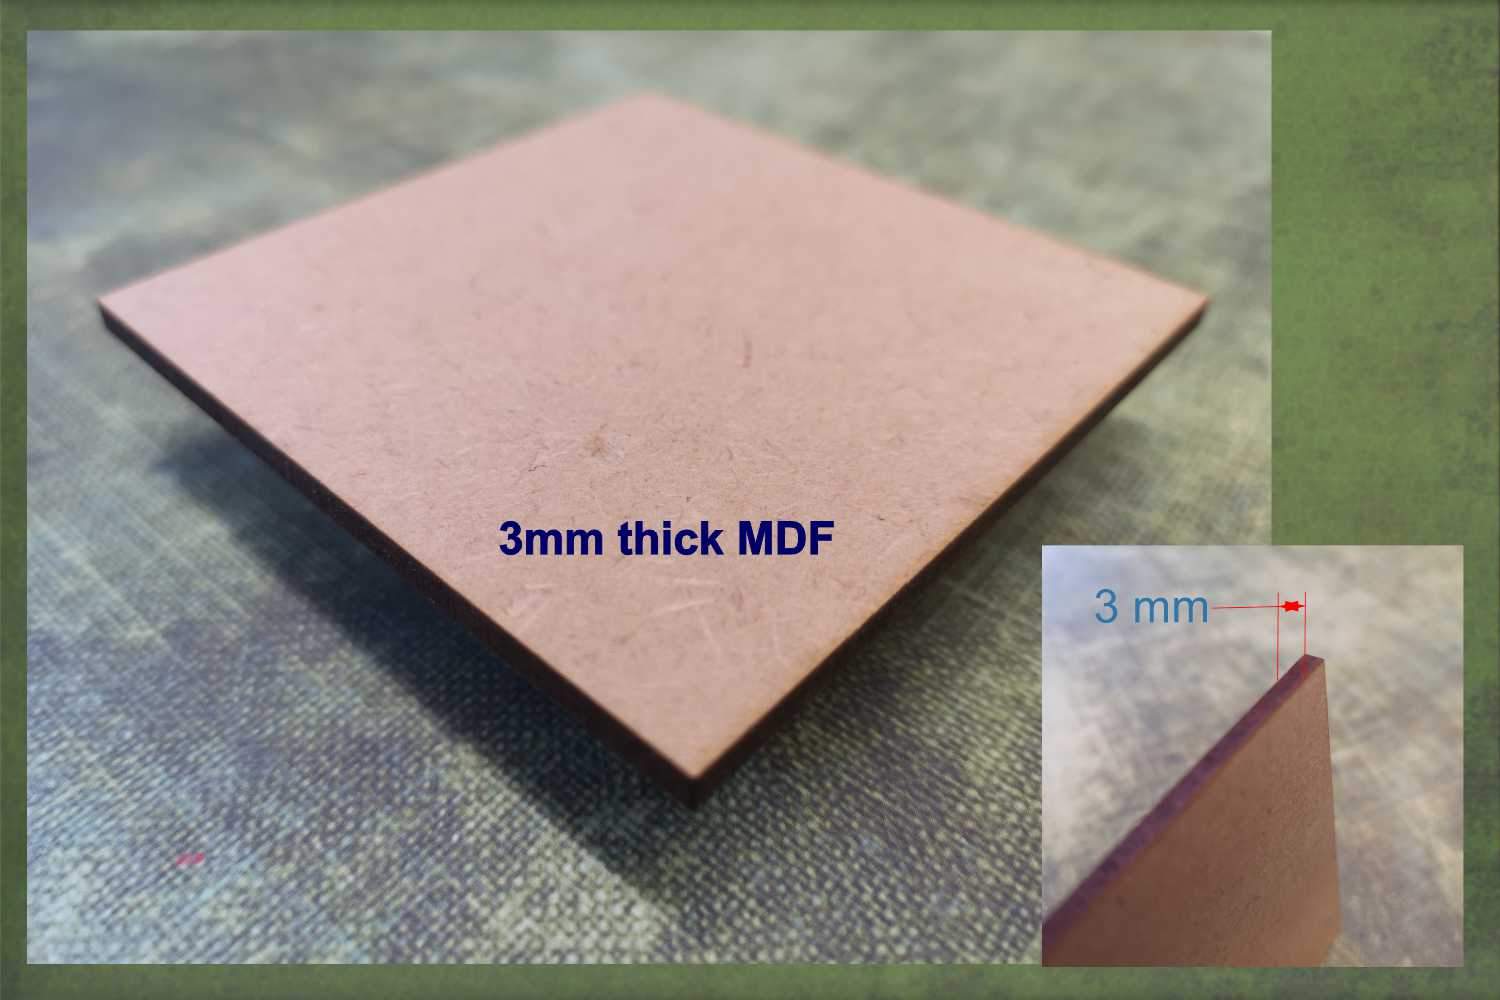 3mm thick MDF used to make the Harrier jet plane cut-outs ready for crafting